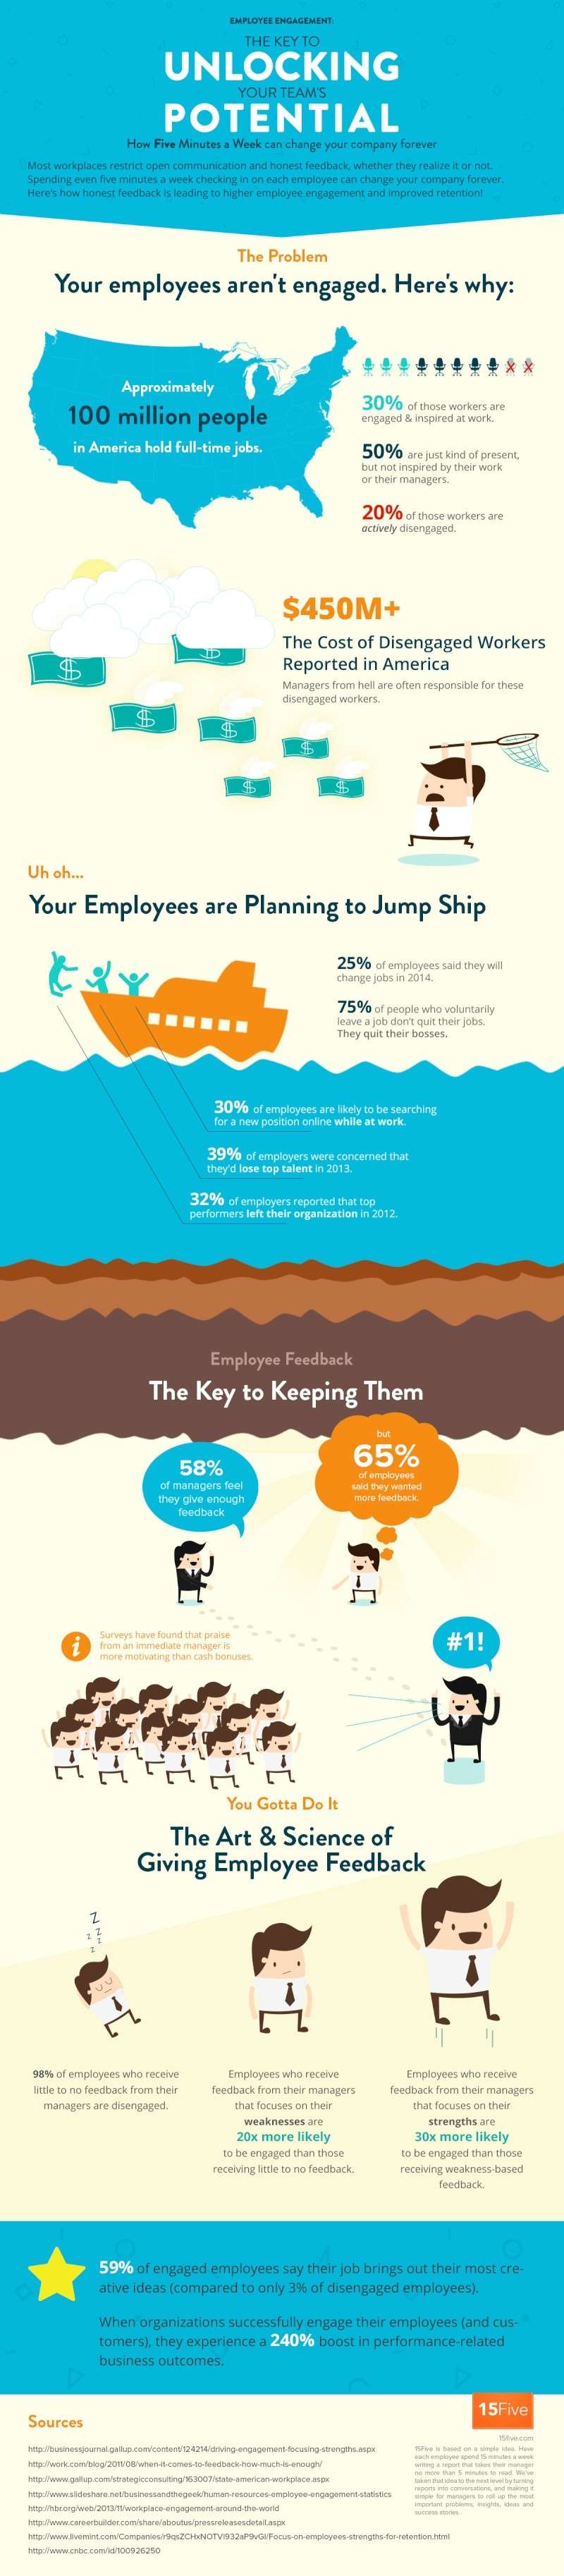 Stopping Employees From Jumping Ship is Easier Than You Think (Infographic)  13939710